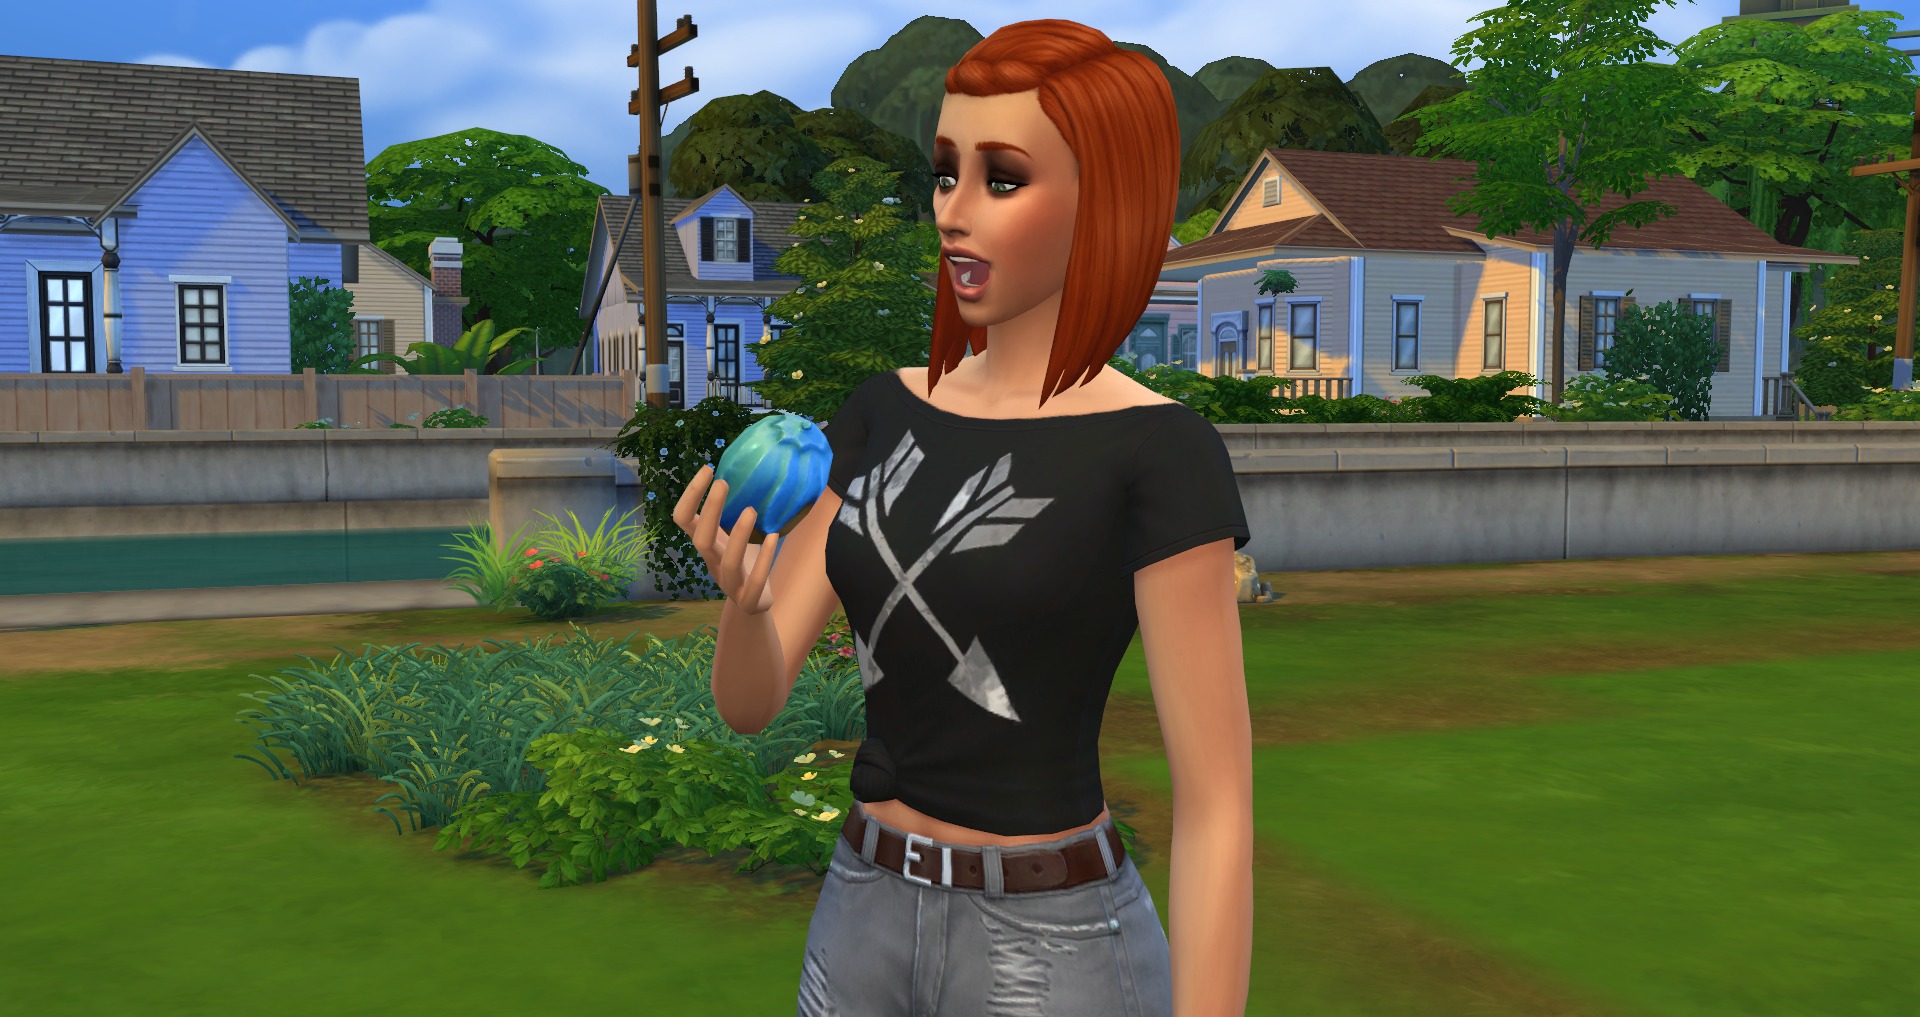 sims 4 life state mods